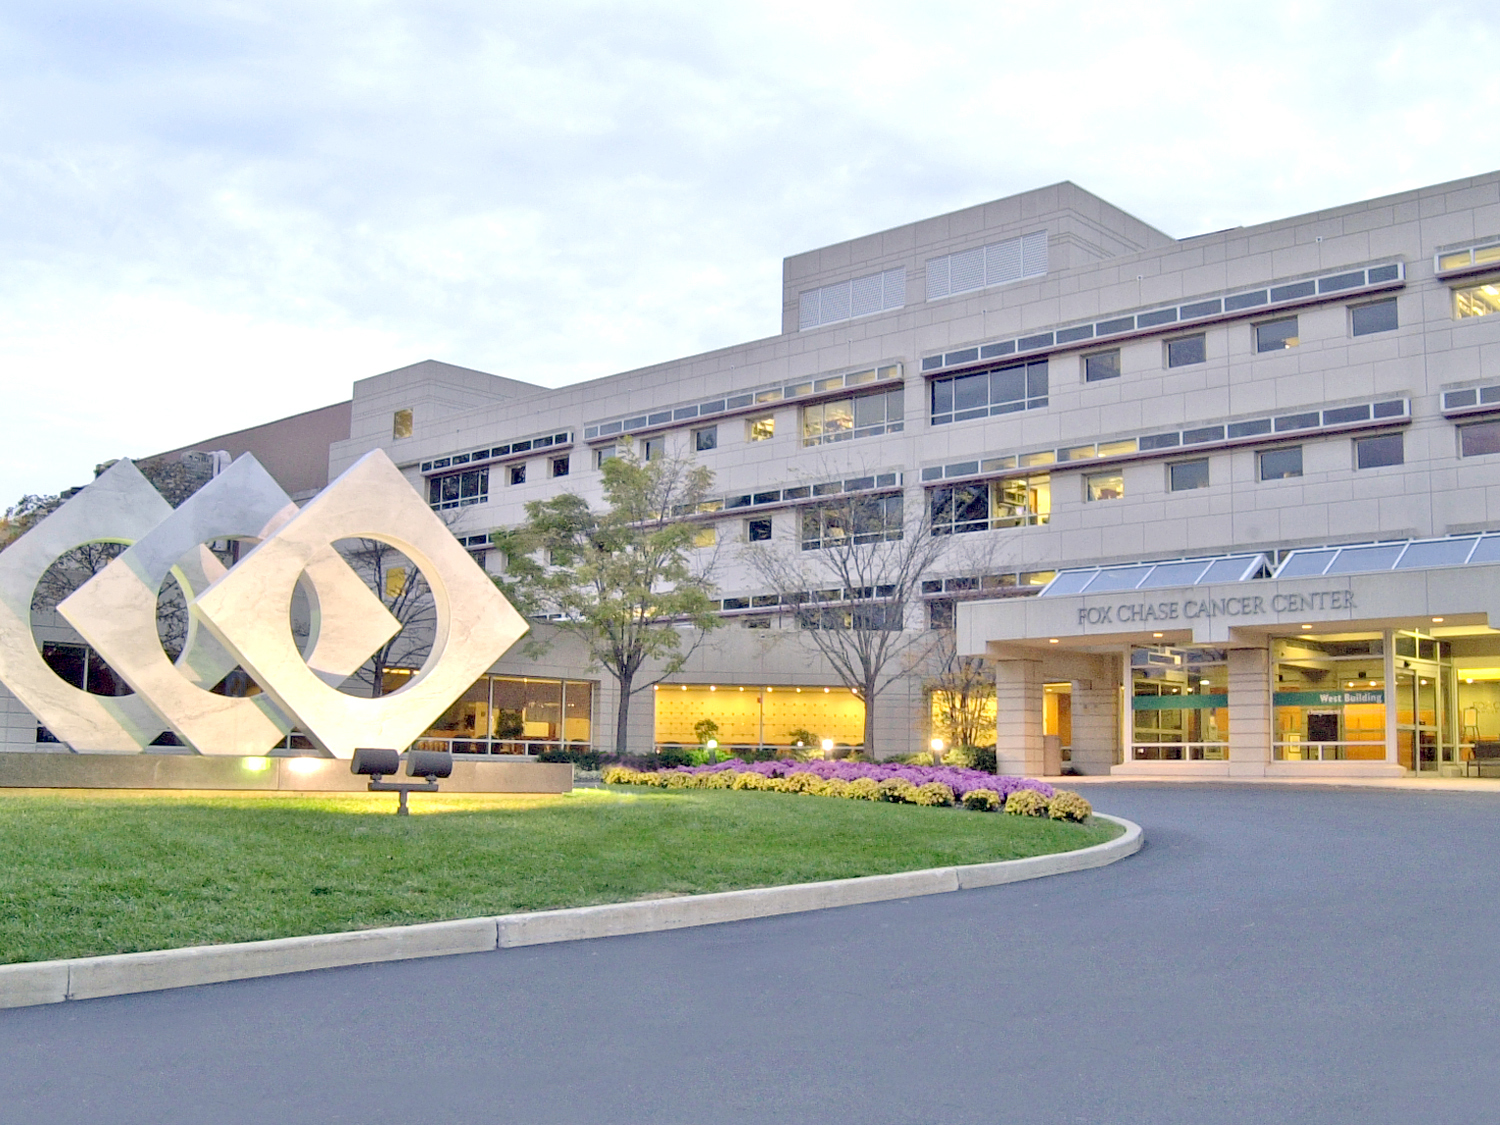 the exterior of Fox Chase Cancer Center